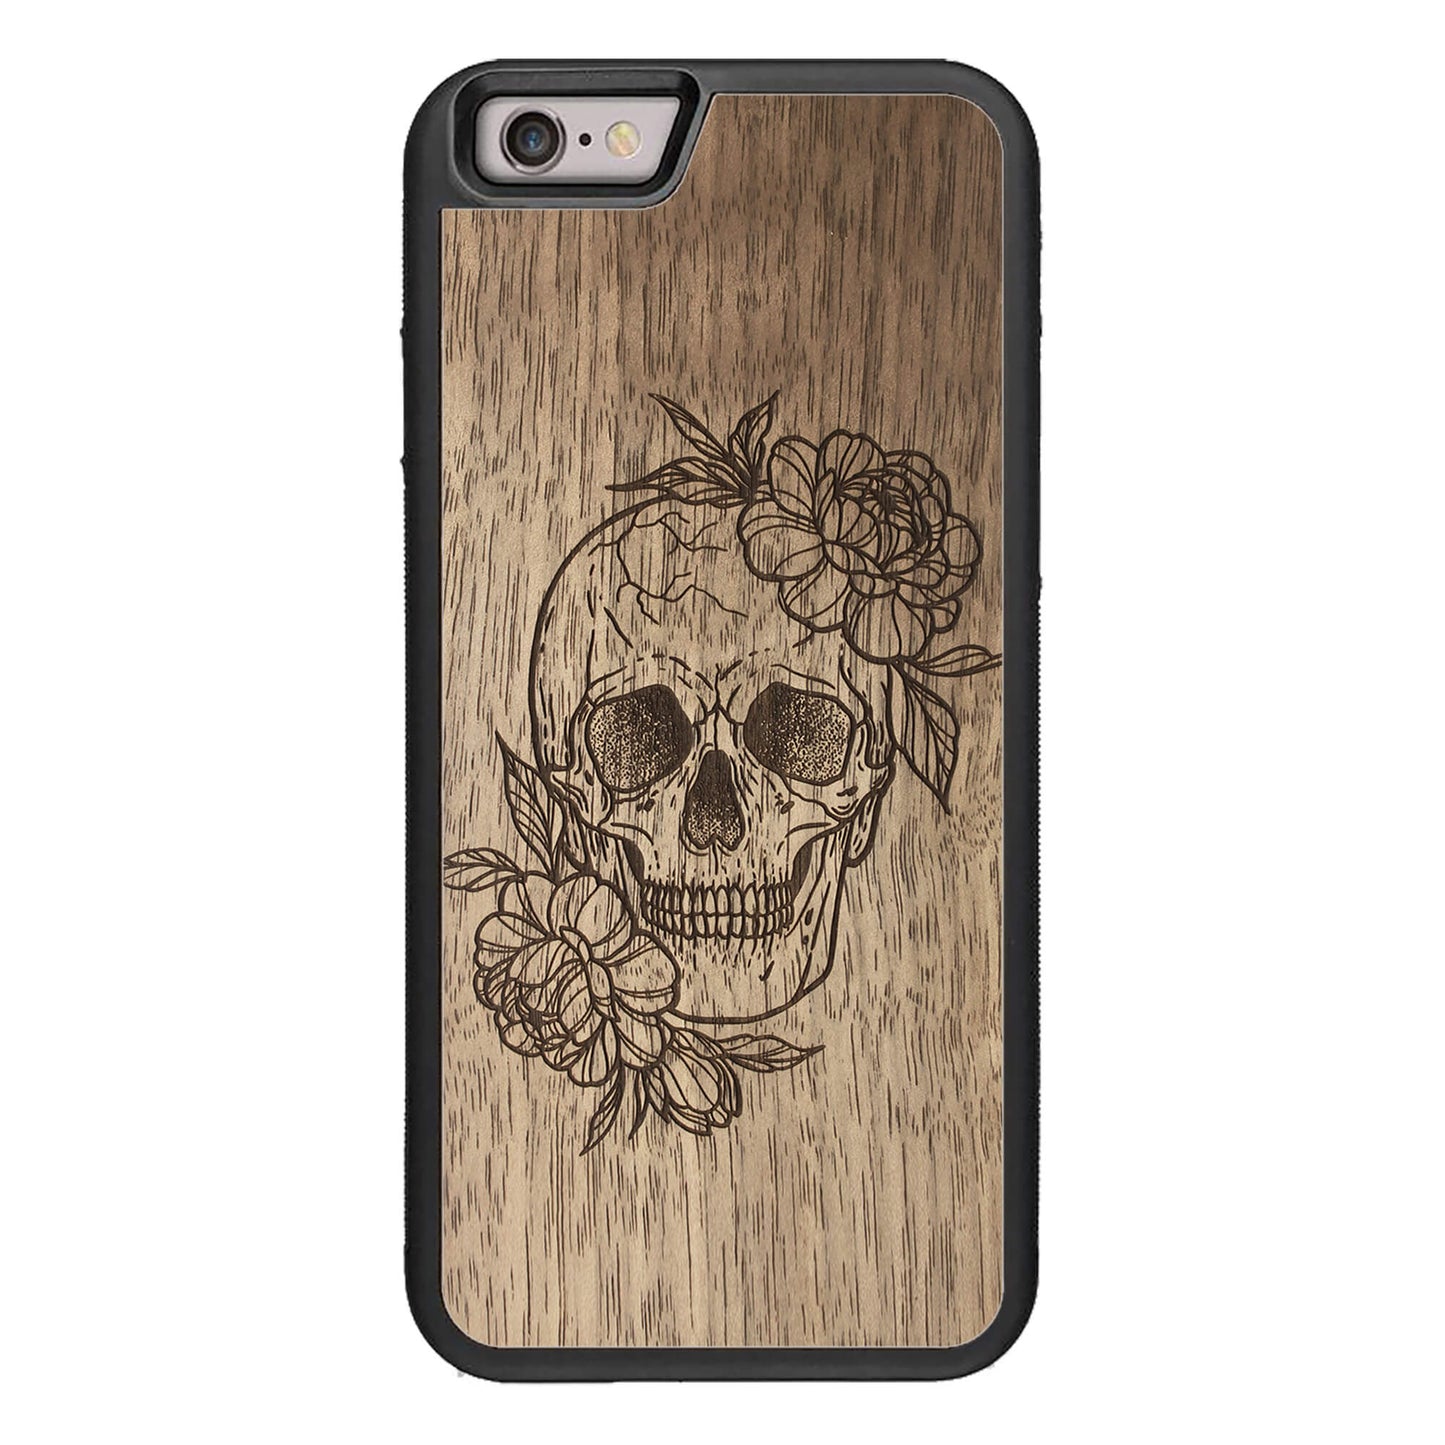 Wooden Case for iPhone 6/6S Skull